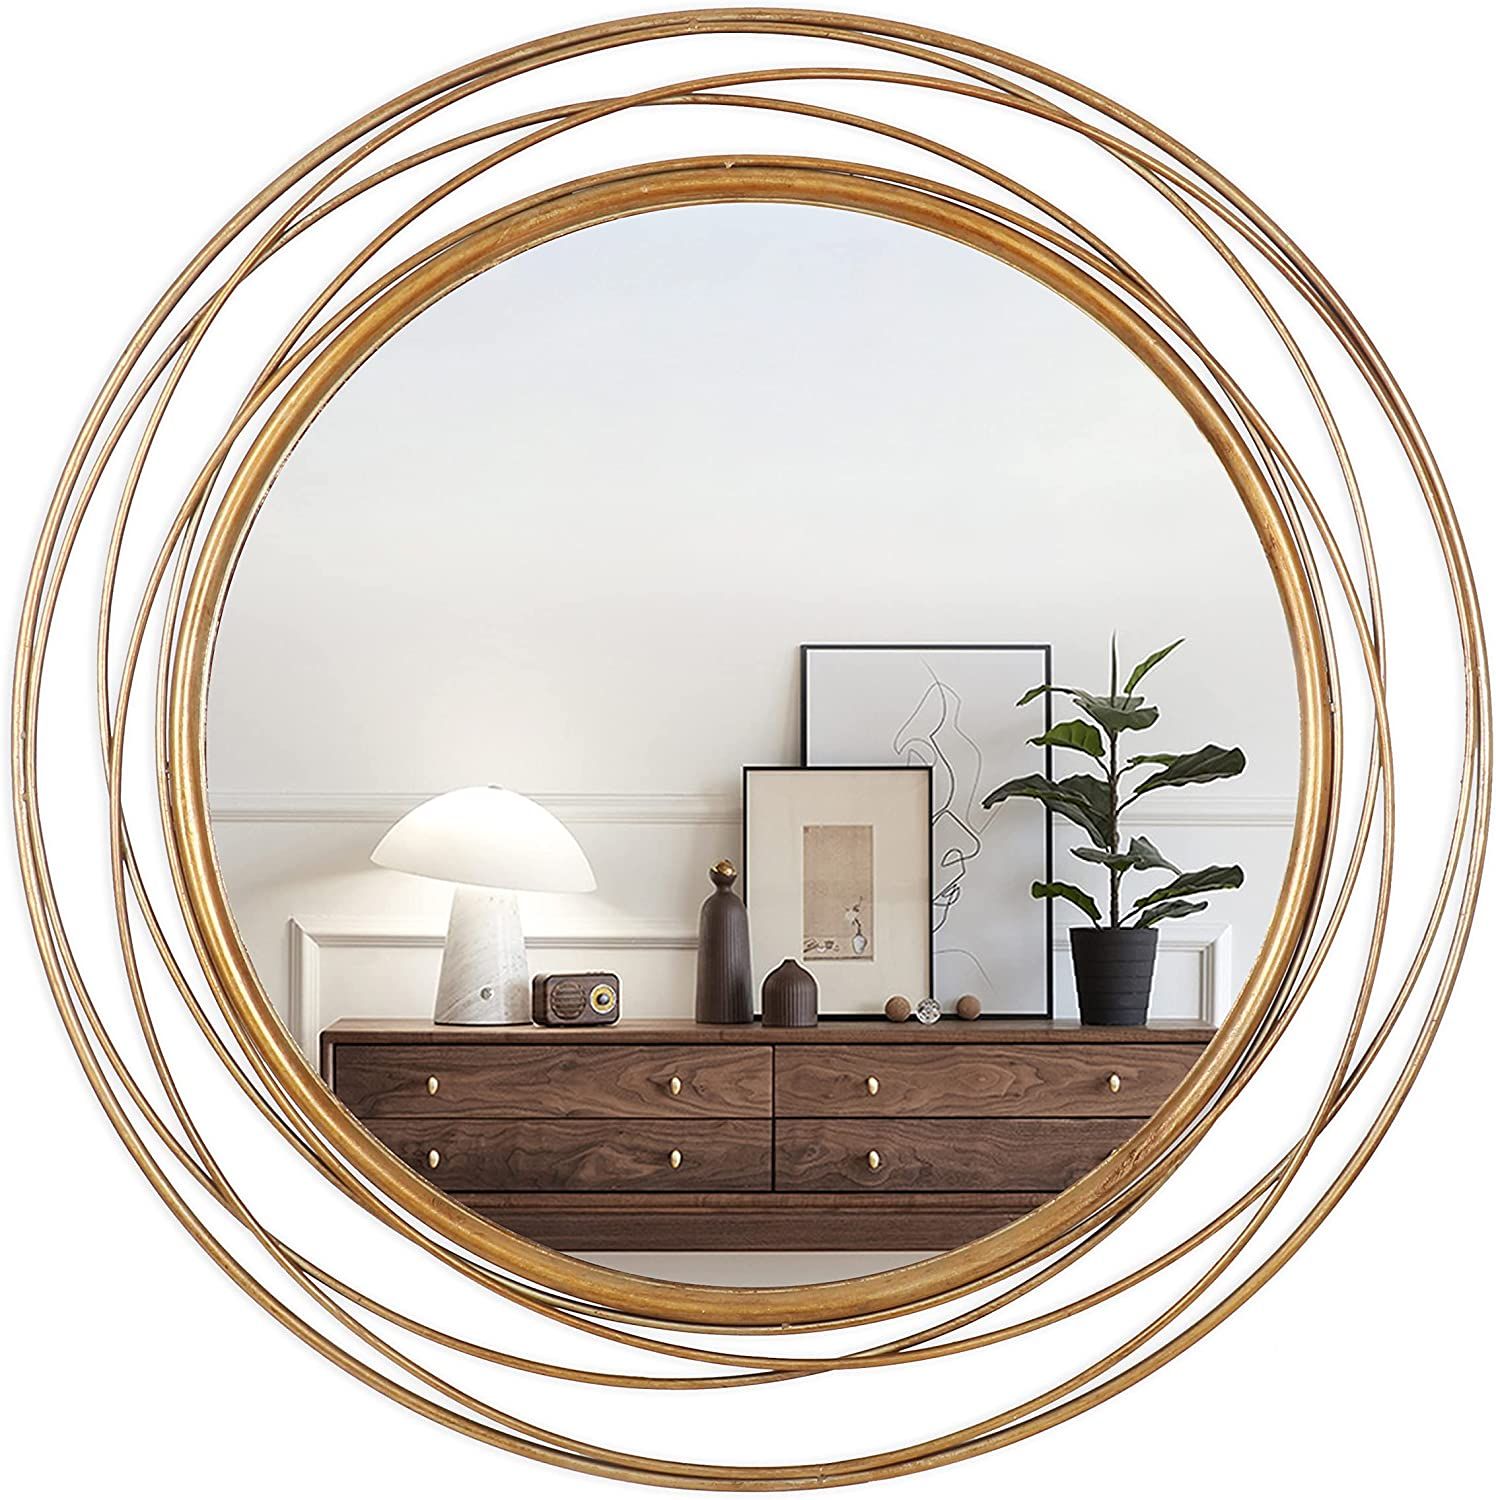 VELLQUE 36 inch Round Mirror Gold,Circle Wall Mirror for Bathroom Vanity,Large Circle Mirror for ... | Amazon (US)